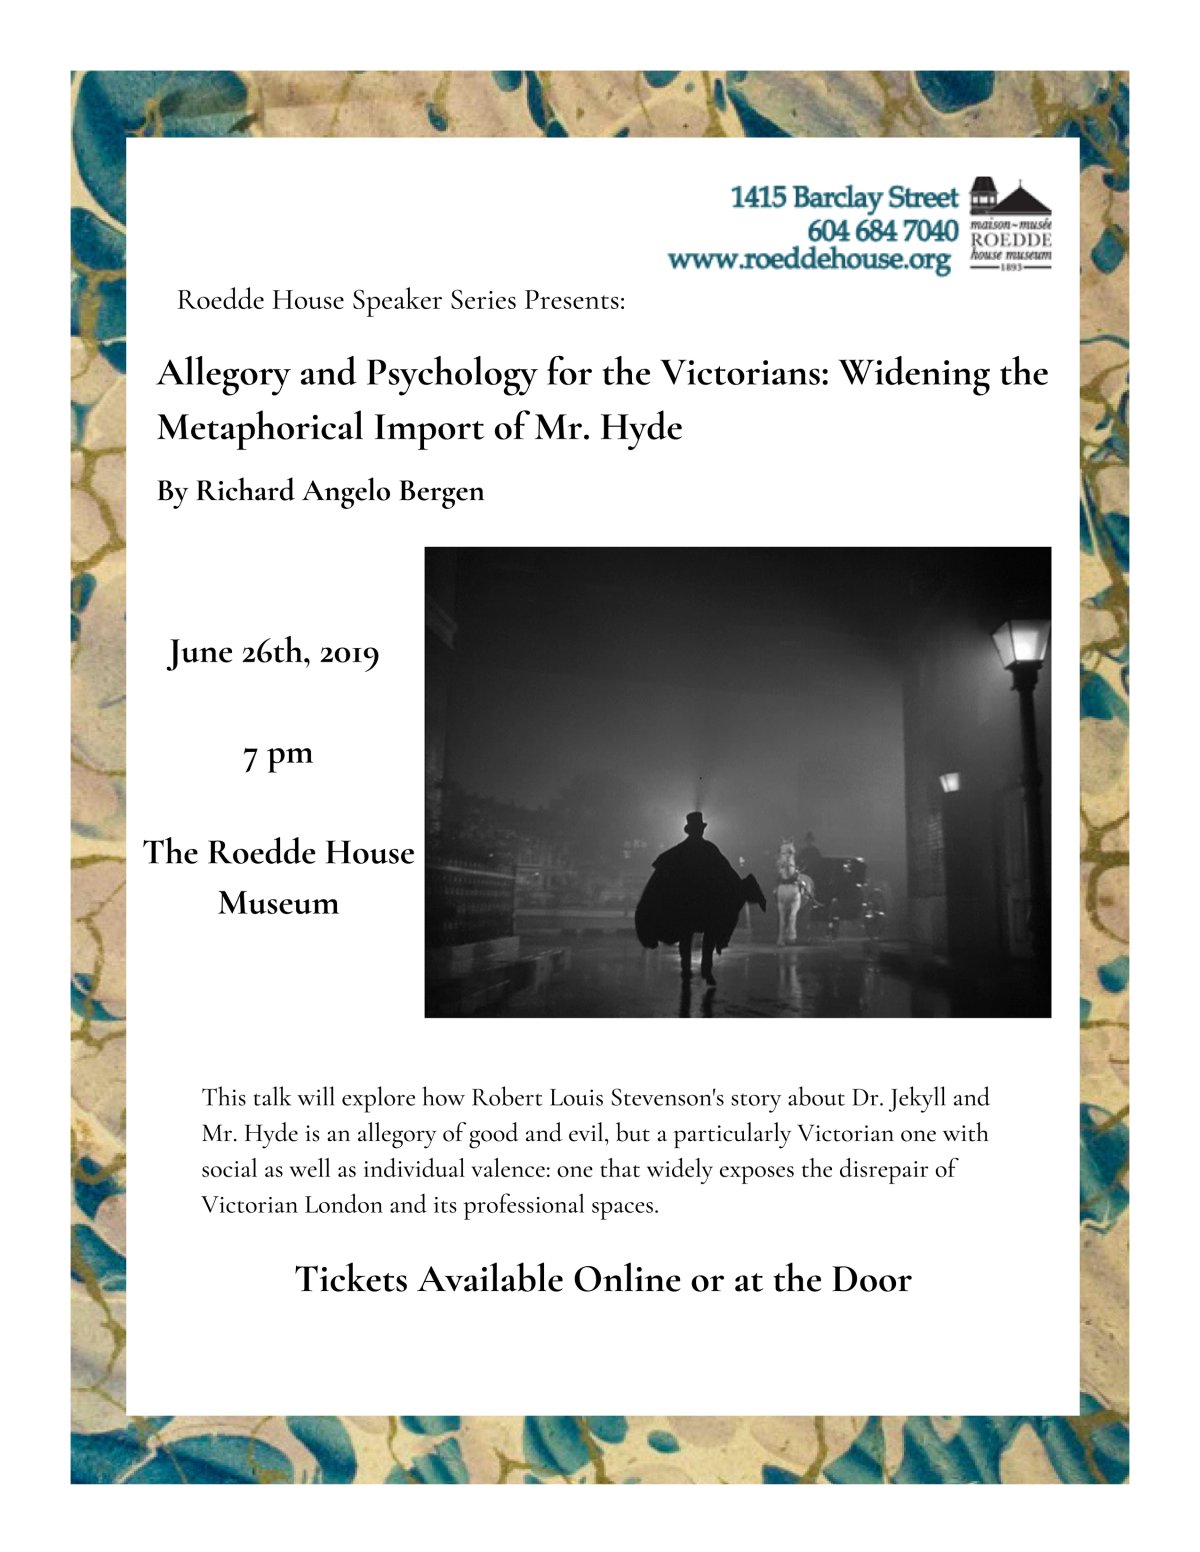 Roedde House Speaker Series, June 26th: “Psychology and Allegory for the Victorians in “Strange Case of Dr. Jekyll and Mr. Hyde” - image